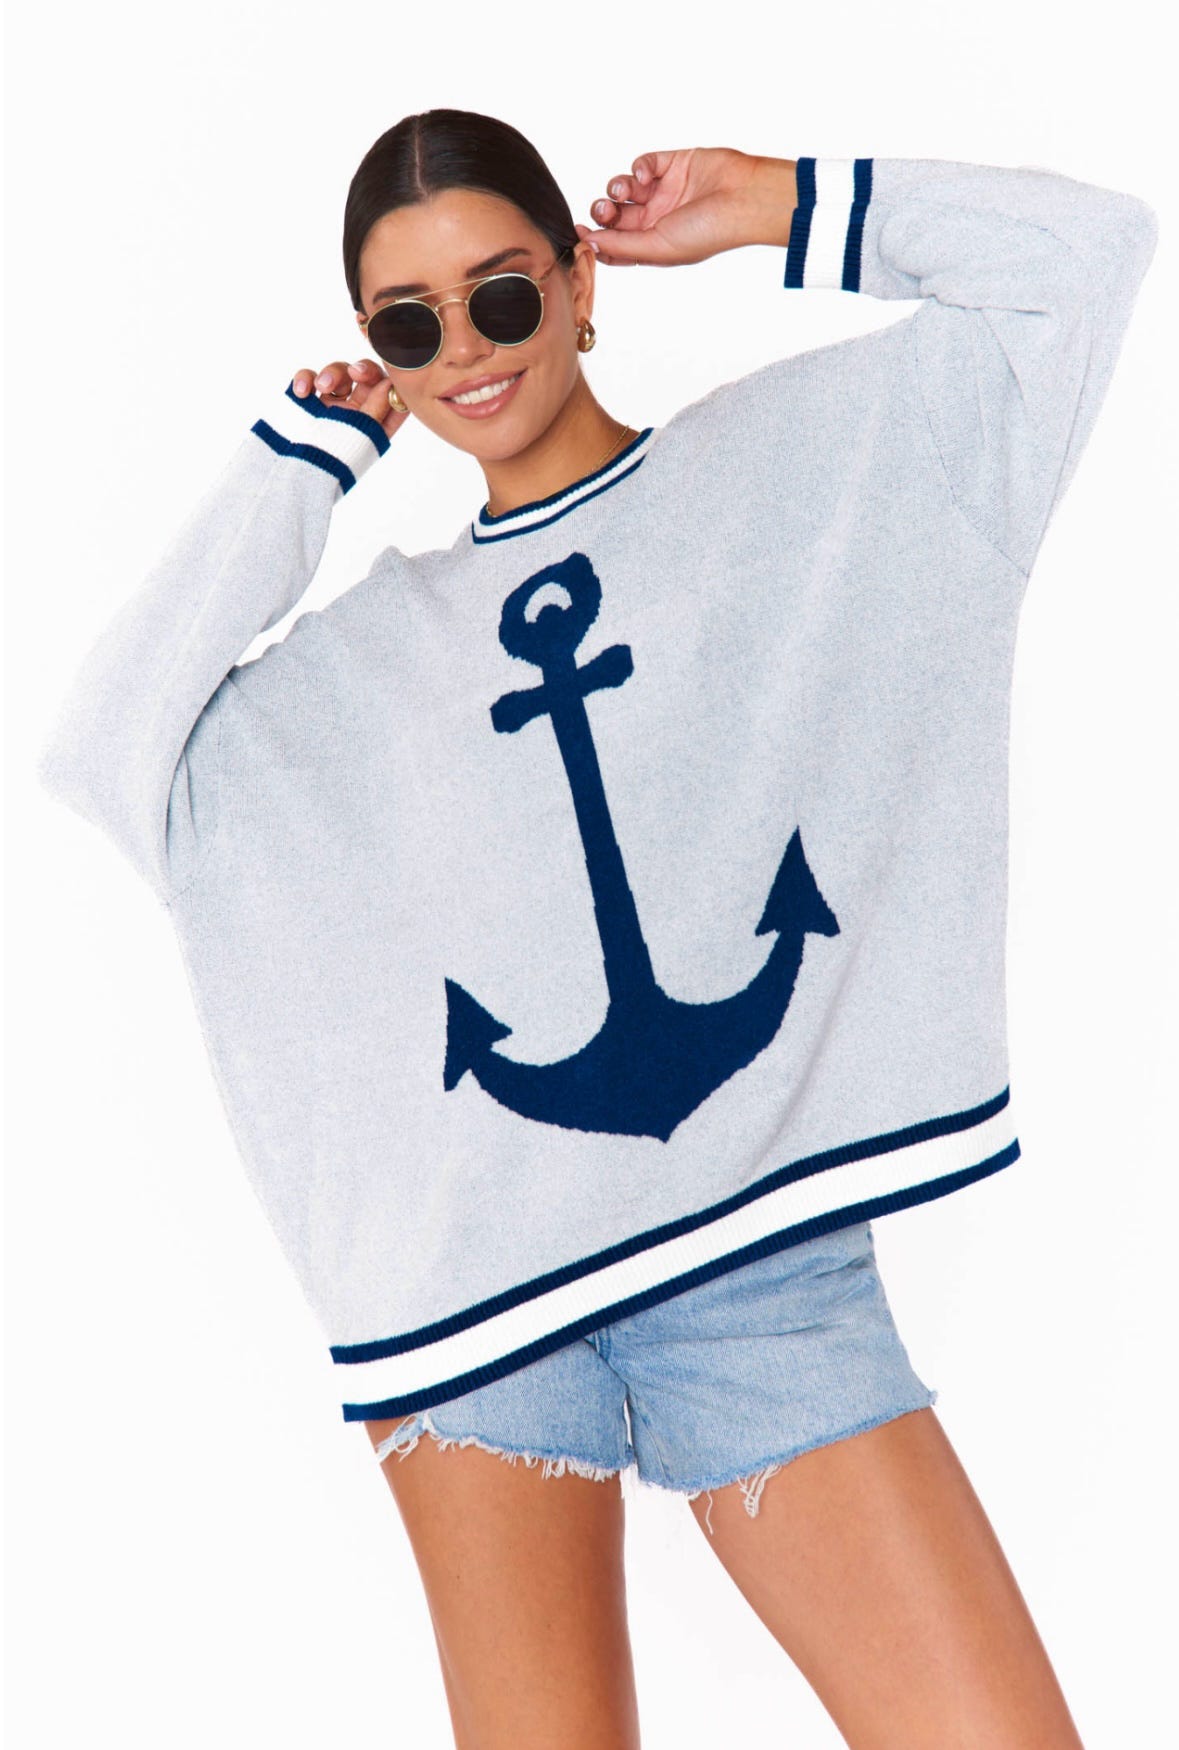 Adventure Sweater Anchor Graphic Knit